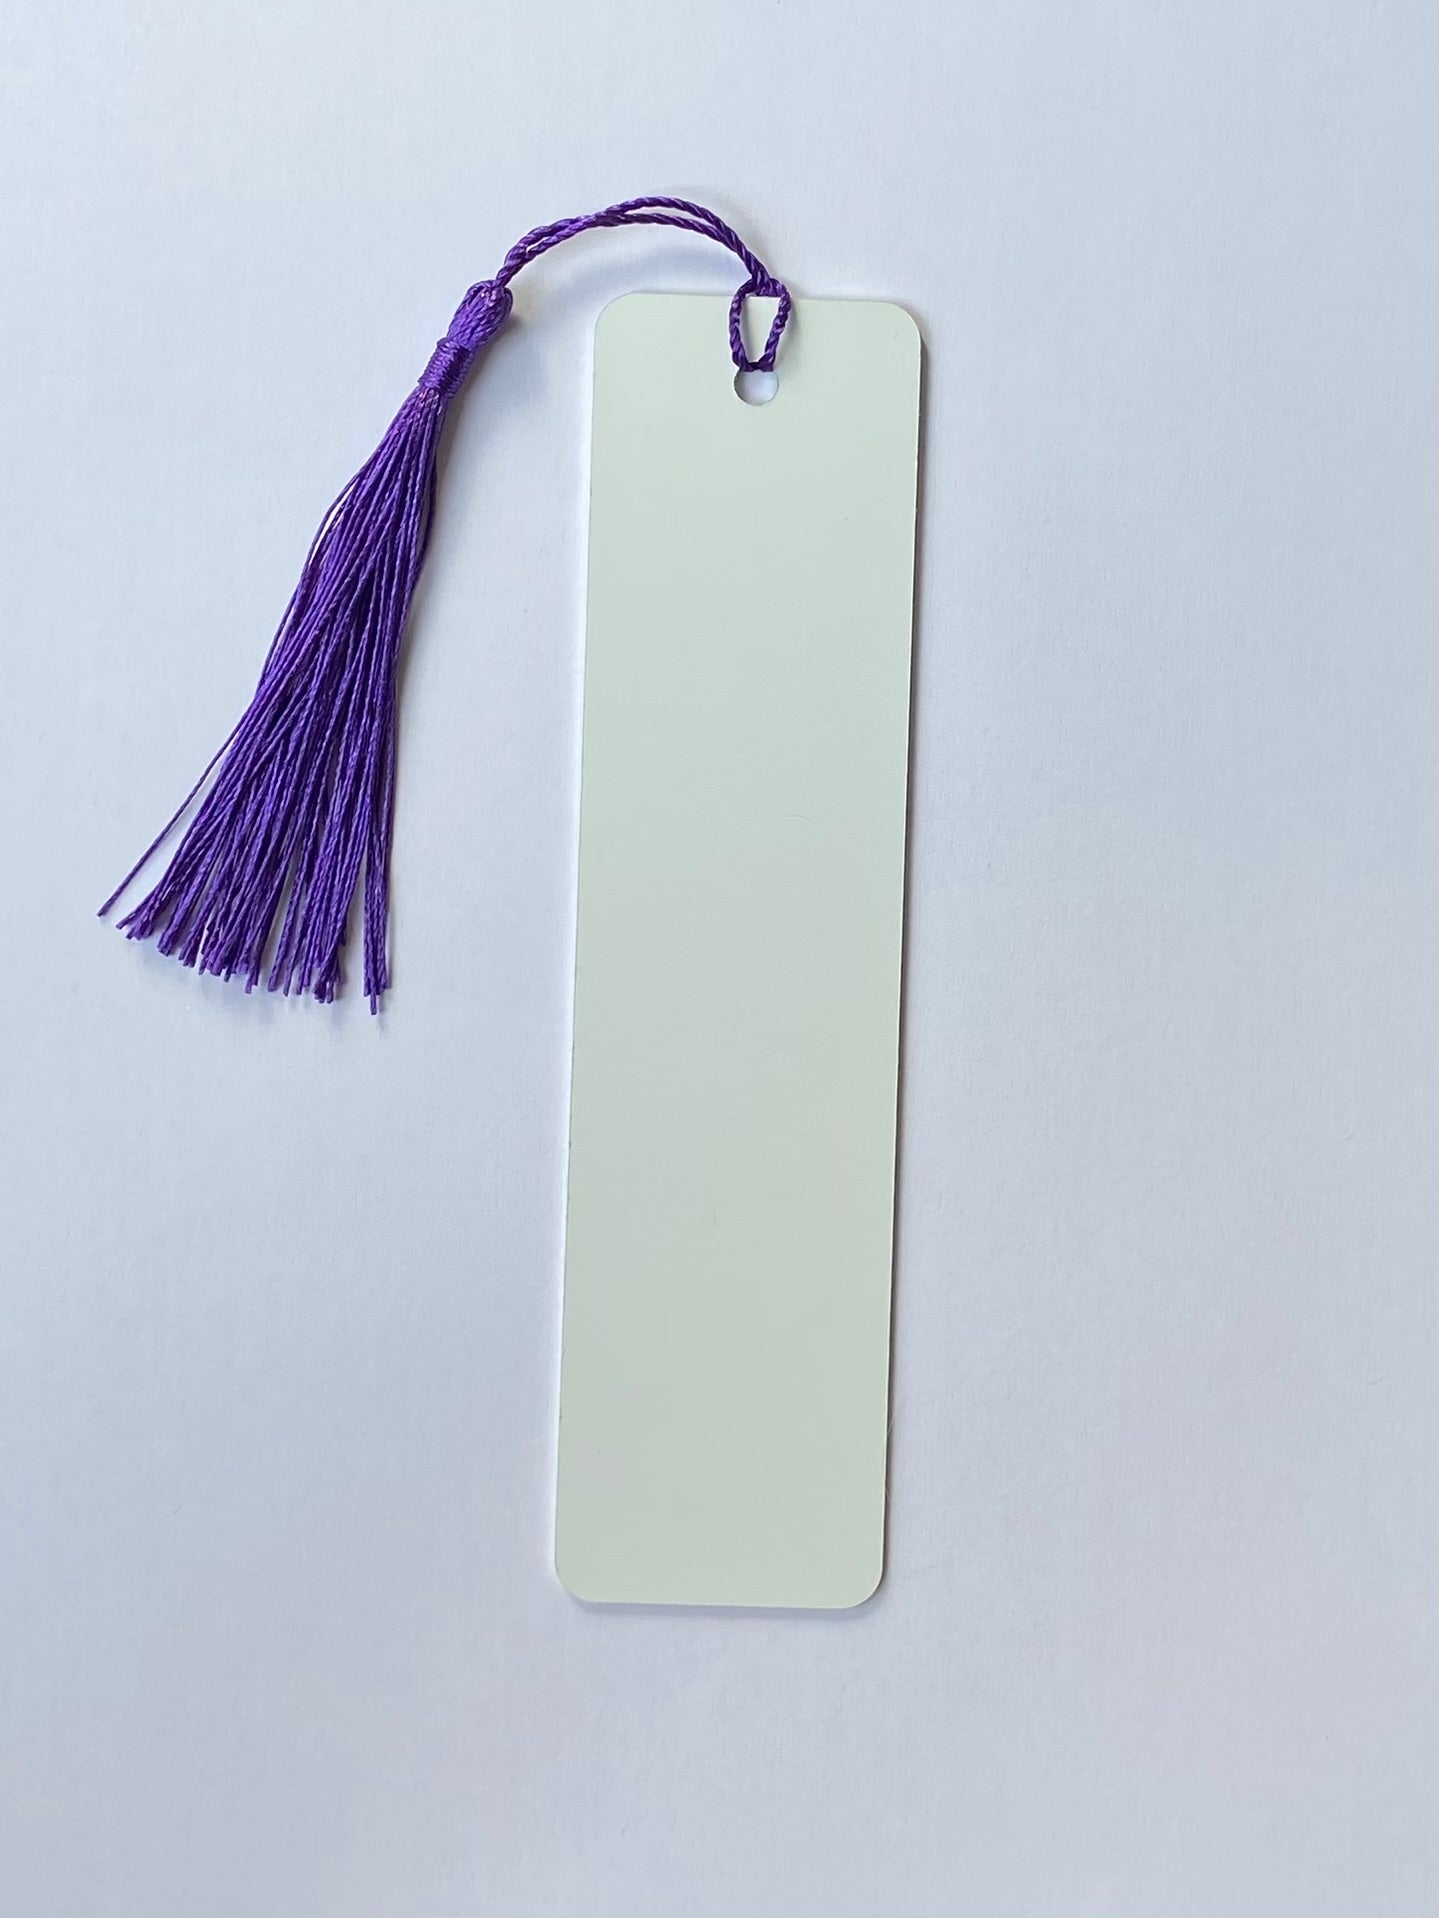 MDF Sublimation Bookmarks 9.5cm x 2.8cm Double Sided - Multi Packs